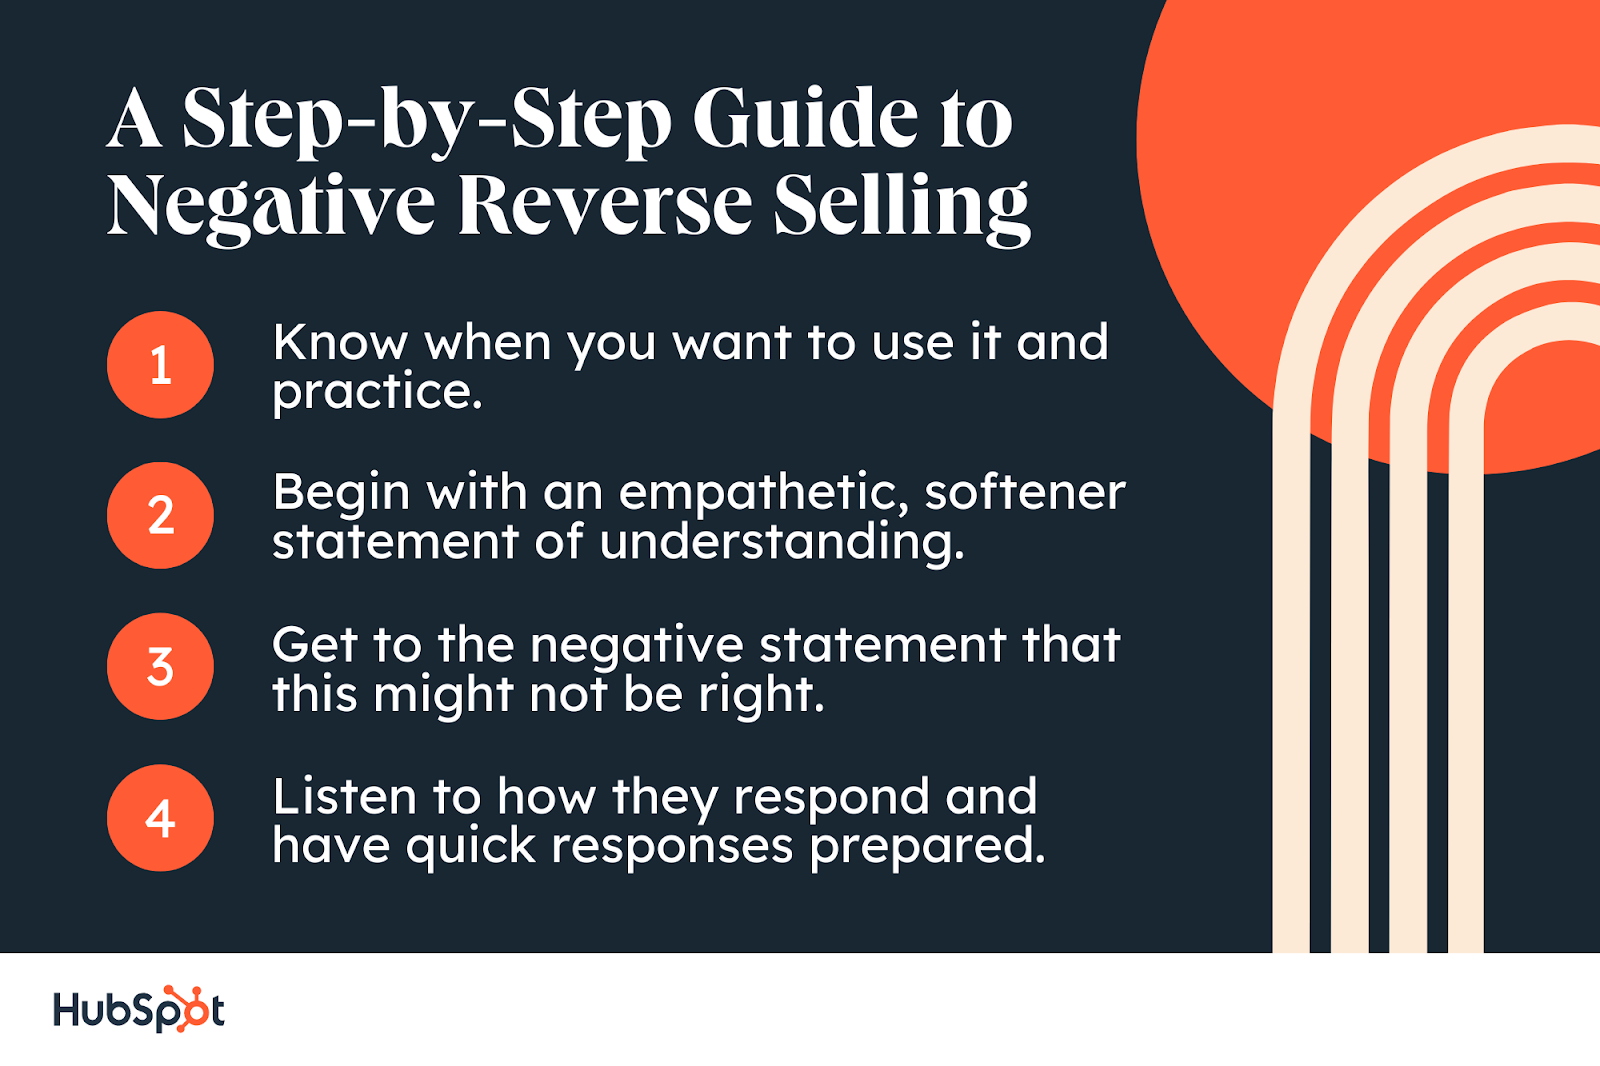 A Step-by-Step Guide to Negative Reverse Selling. Know when you want to use it and practice. Begin with an empathetic, softener statement of understanding. Get to the negative statement that this might not be right. Listen to how they respond and have quick responses prepared.